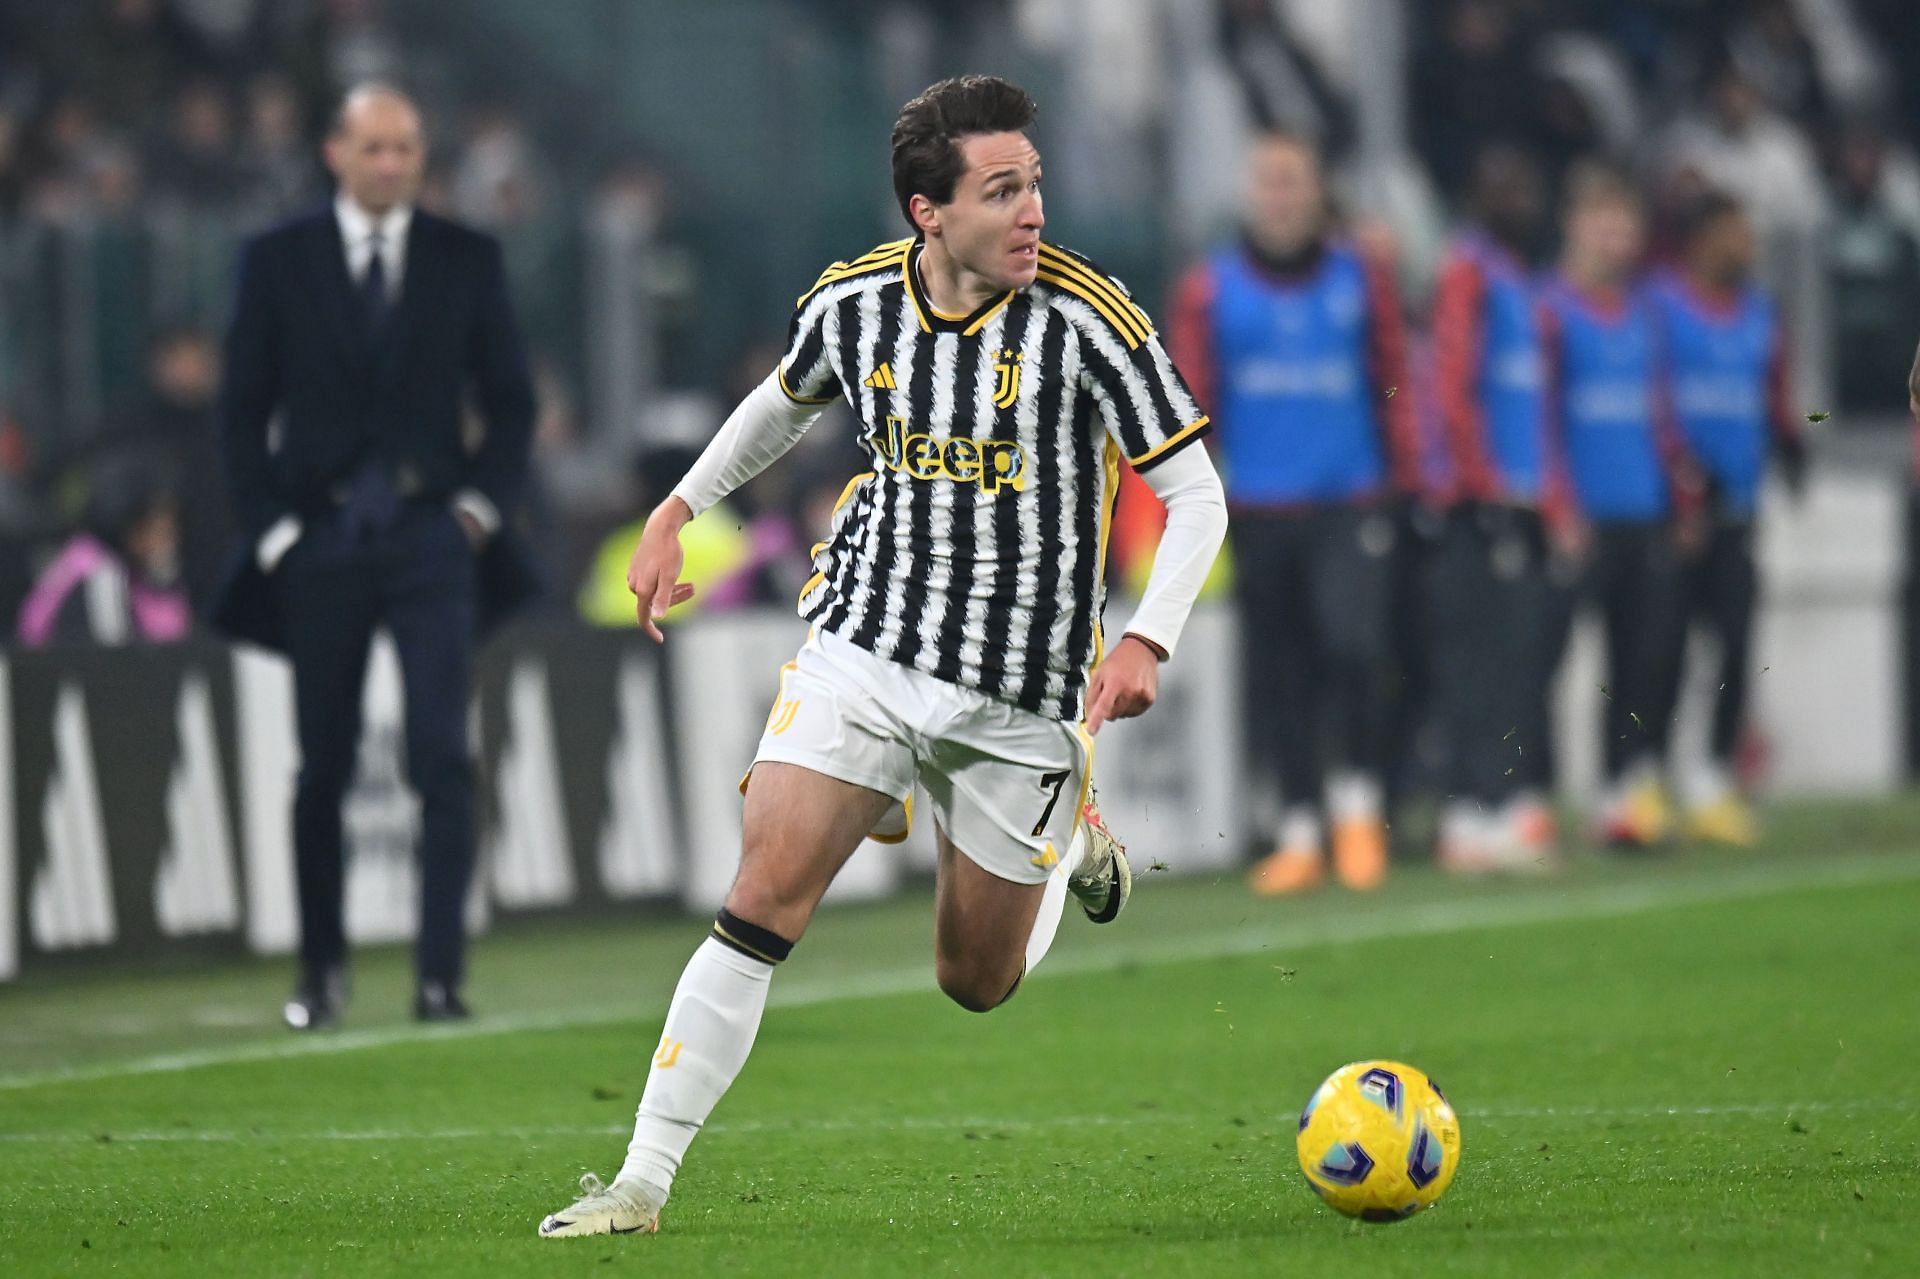 Federico Chiesa is wanted at Old Trafford.